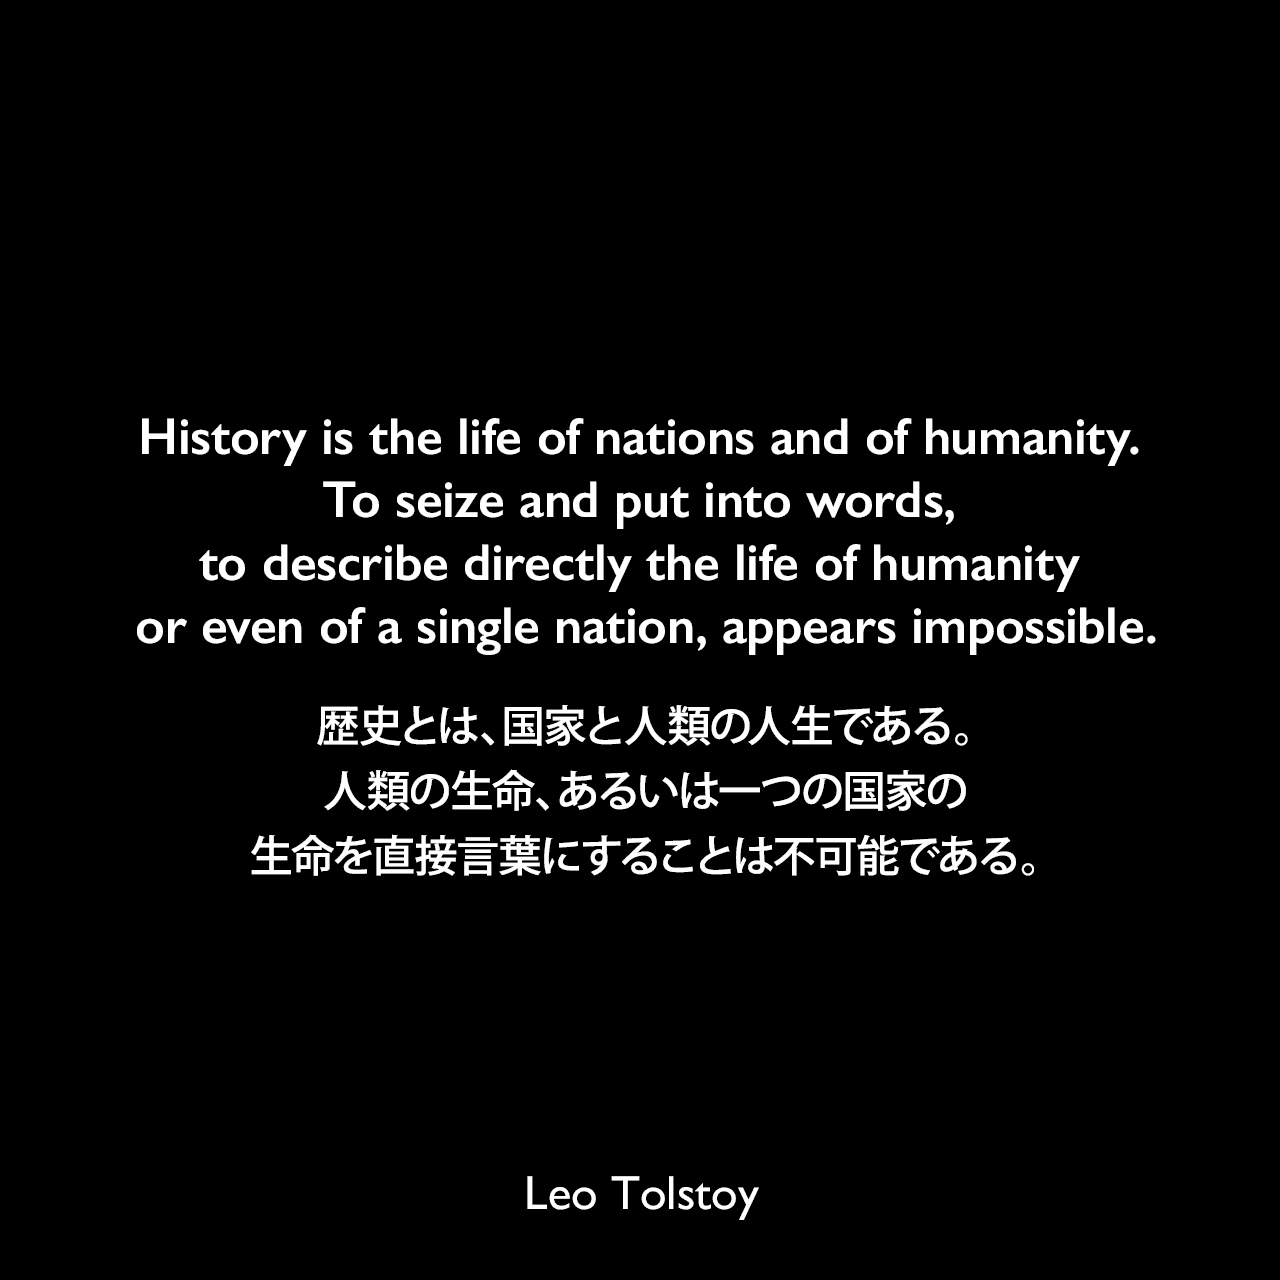 History is the life of nations and of humanity. To seize and put into words, to describe directly the life of humanity or even of a single nation, appears impossible.歴史とは、国家と人類の人生である。人類の生命、あるいは一つの国家の生命を直接言葉にすることは不可能である。- トルストイによる小説「戦争と平和」よりLeo Tolstoy